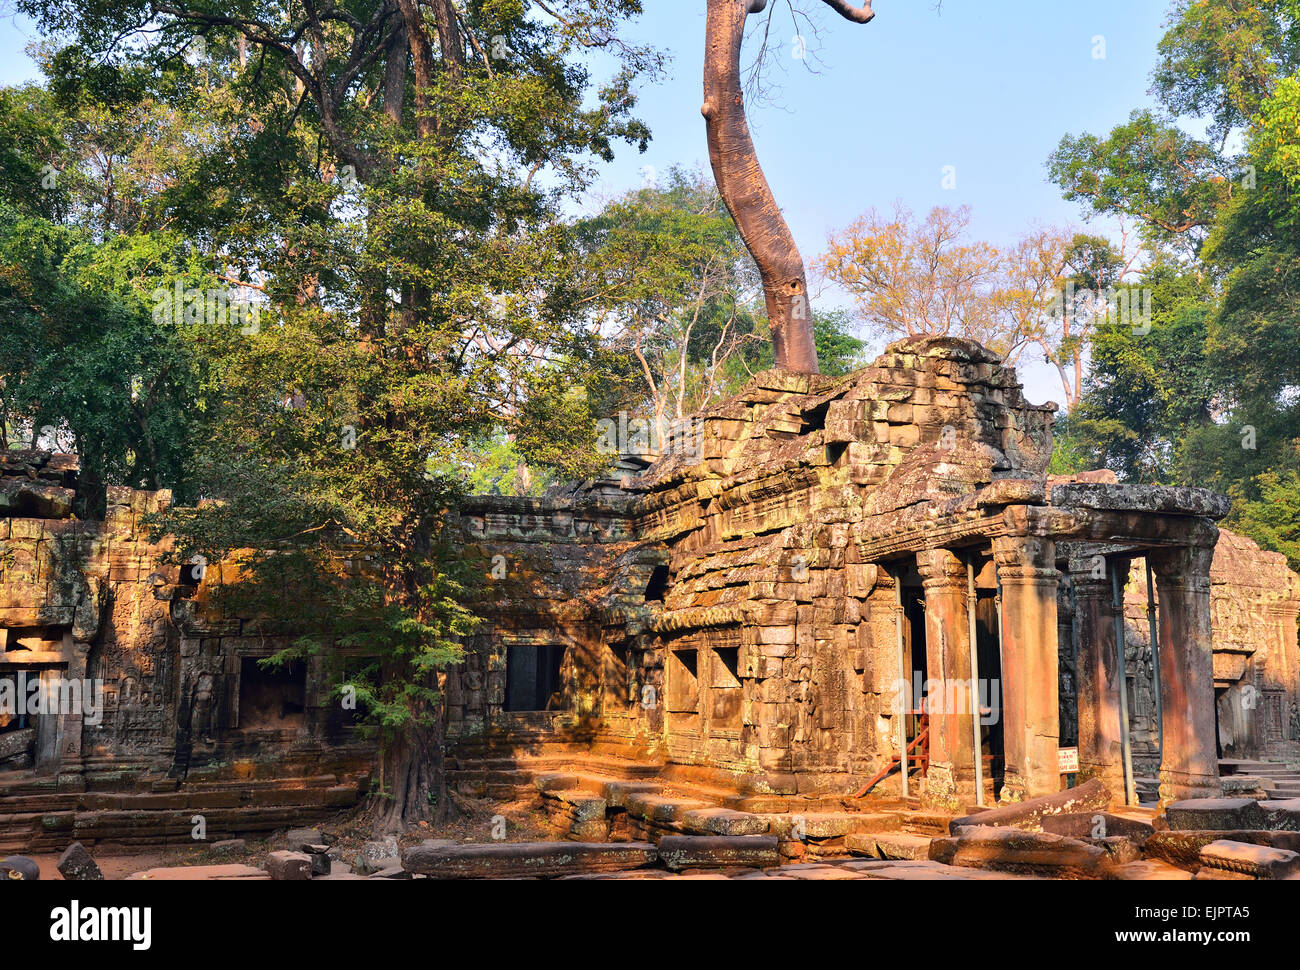 Ta Prohm temple in Angkor Wat, Siem Reap Cambodia. It is also known as jungle temple. Its one of the famous temple in Cambodia. Stock Photo